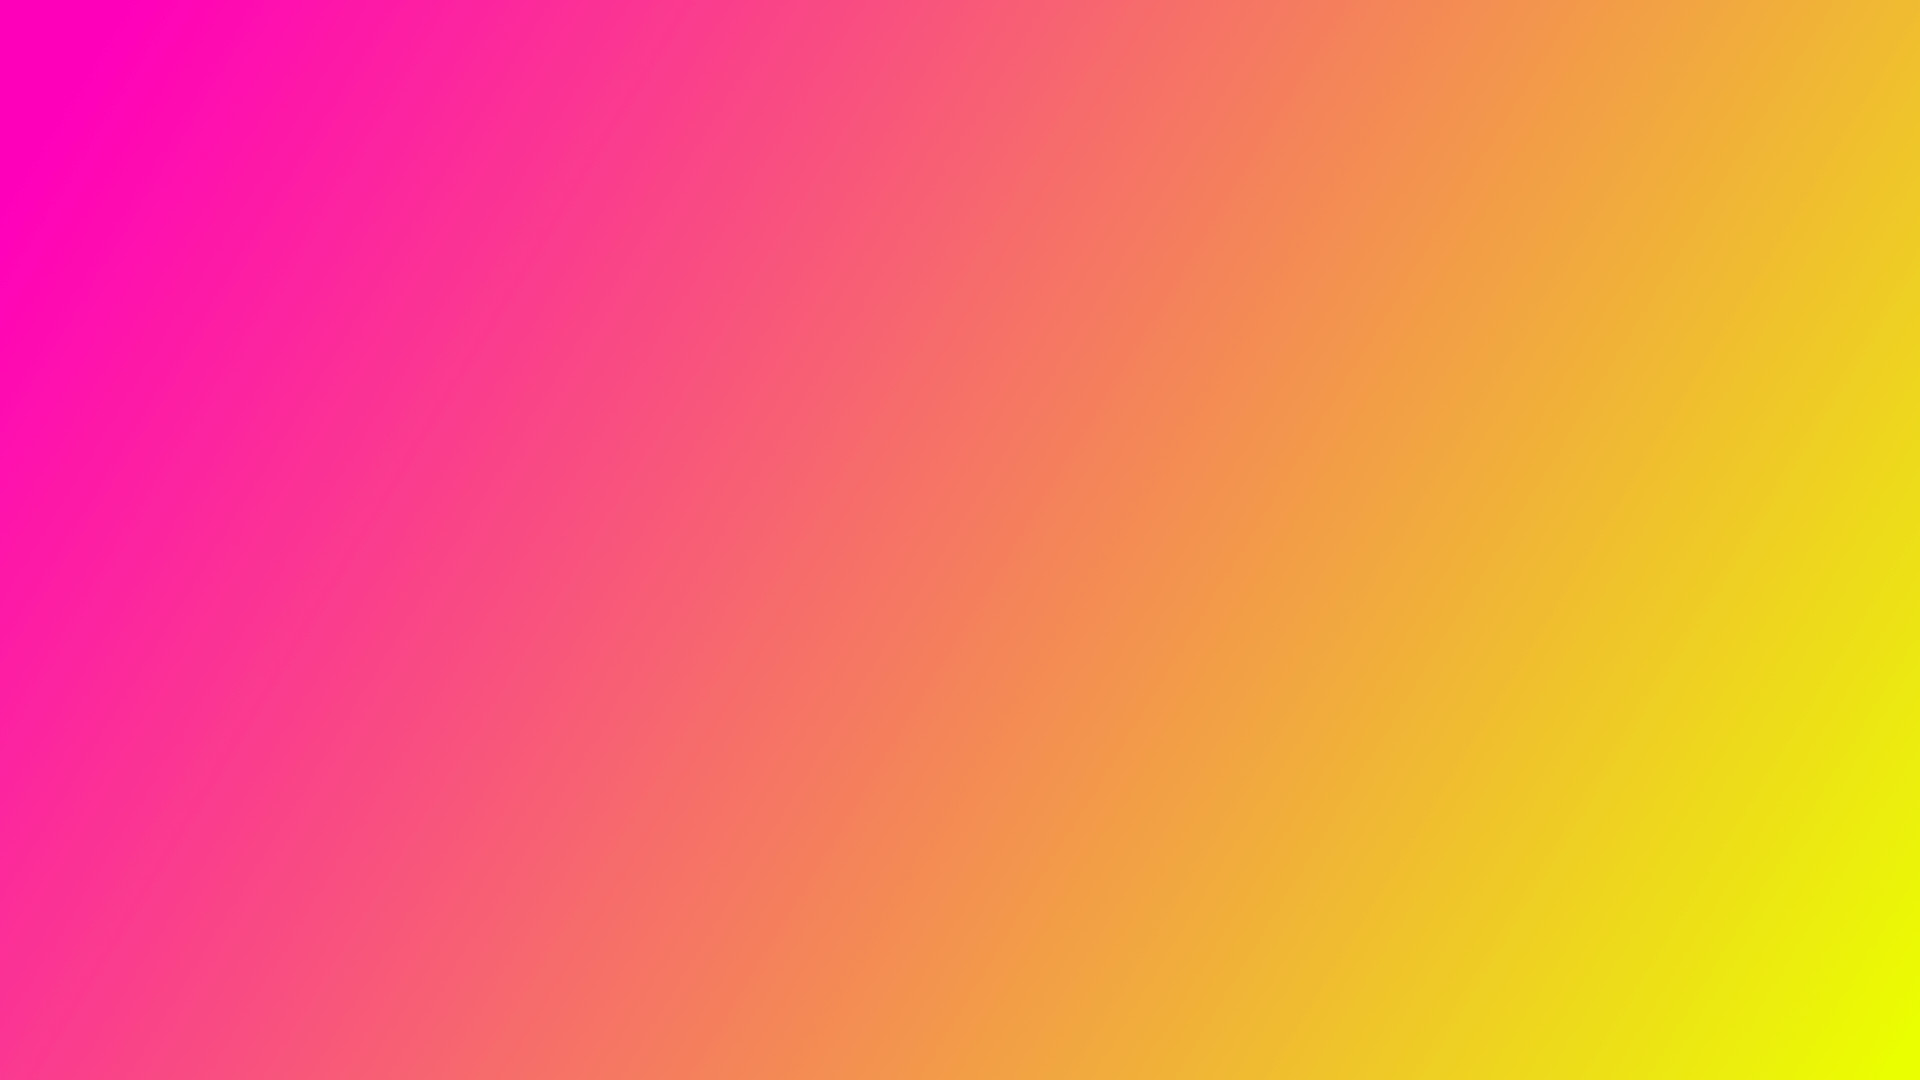 1920x1080 Hot-Pink-to-Bright-Yellow-gradient-1920Ã1080-wallpaper-wp8008060